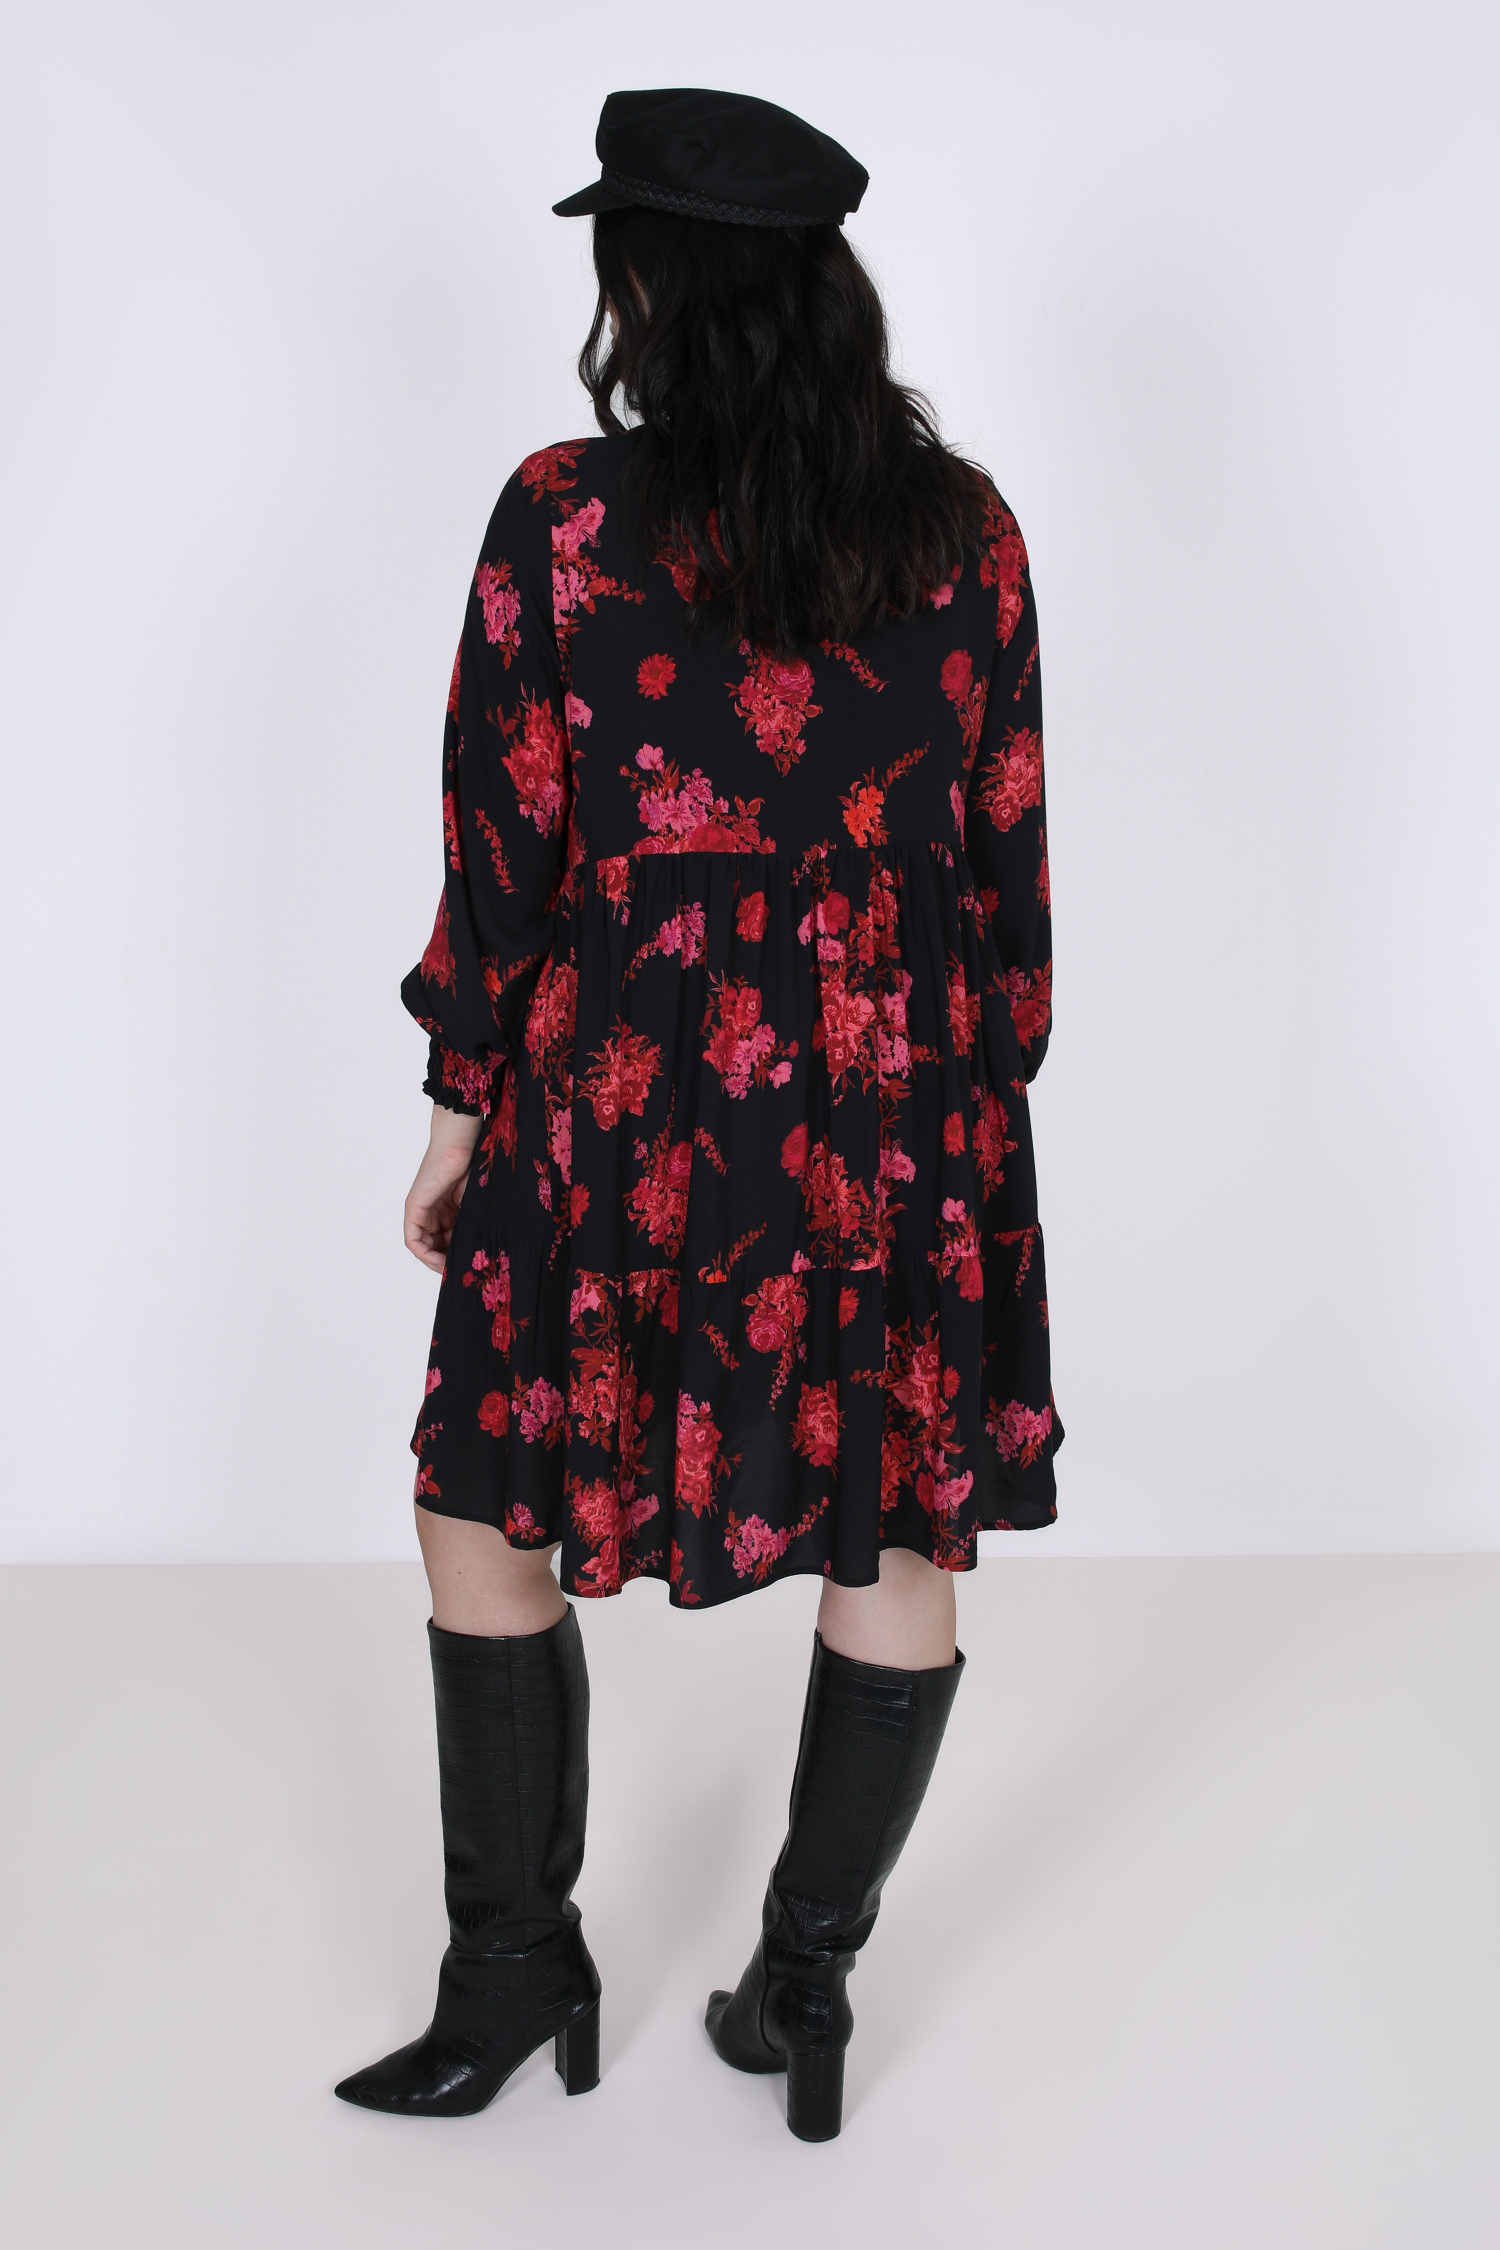 Printed dress with zipped collar